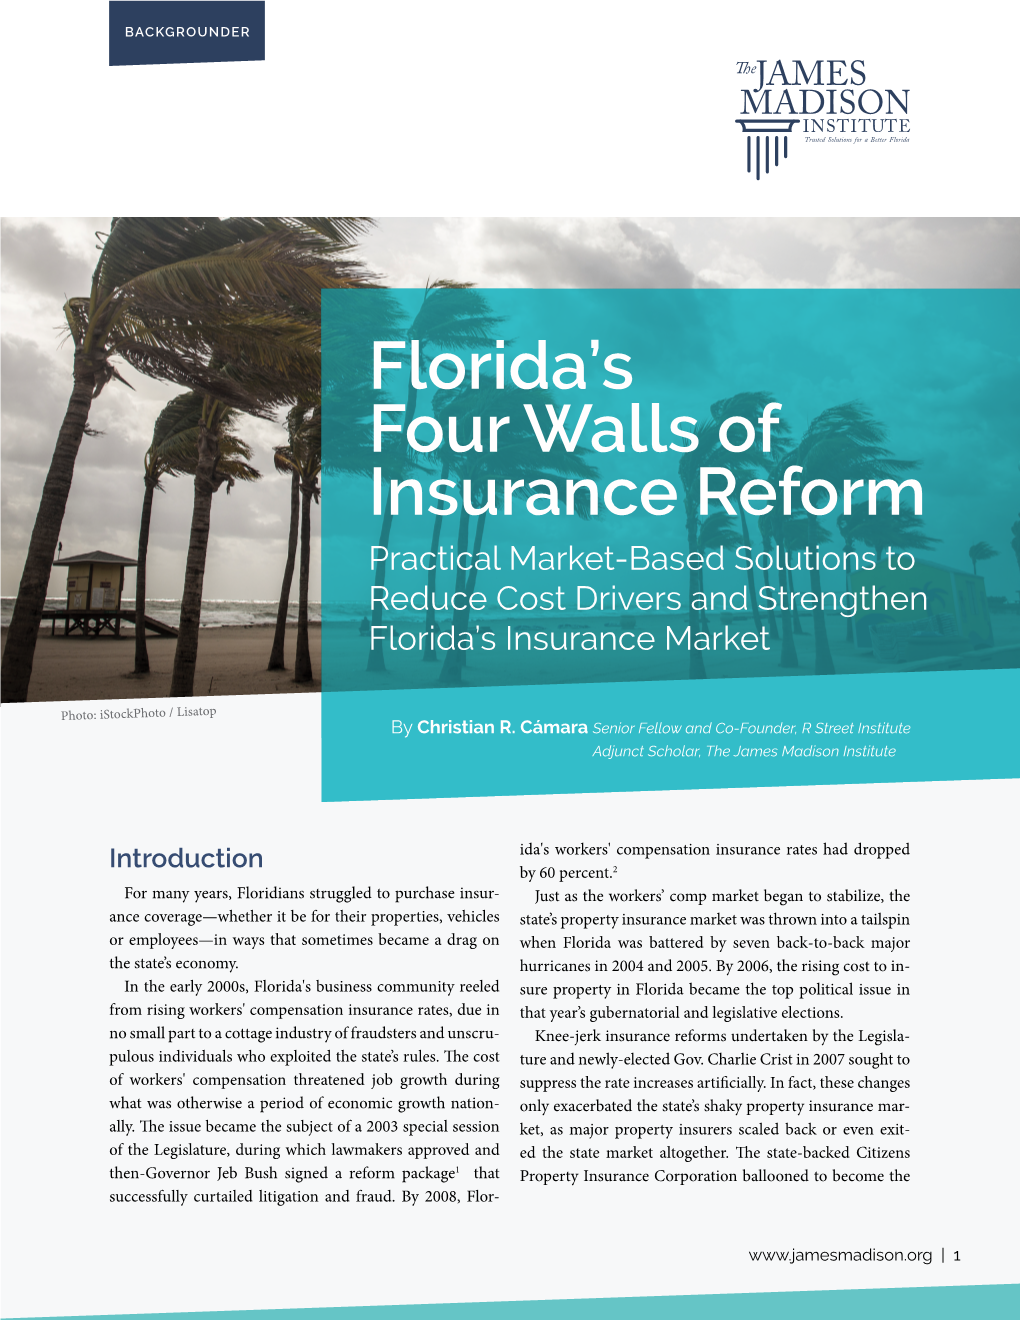 Florida's Four Walls of Insurance Reform